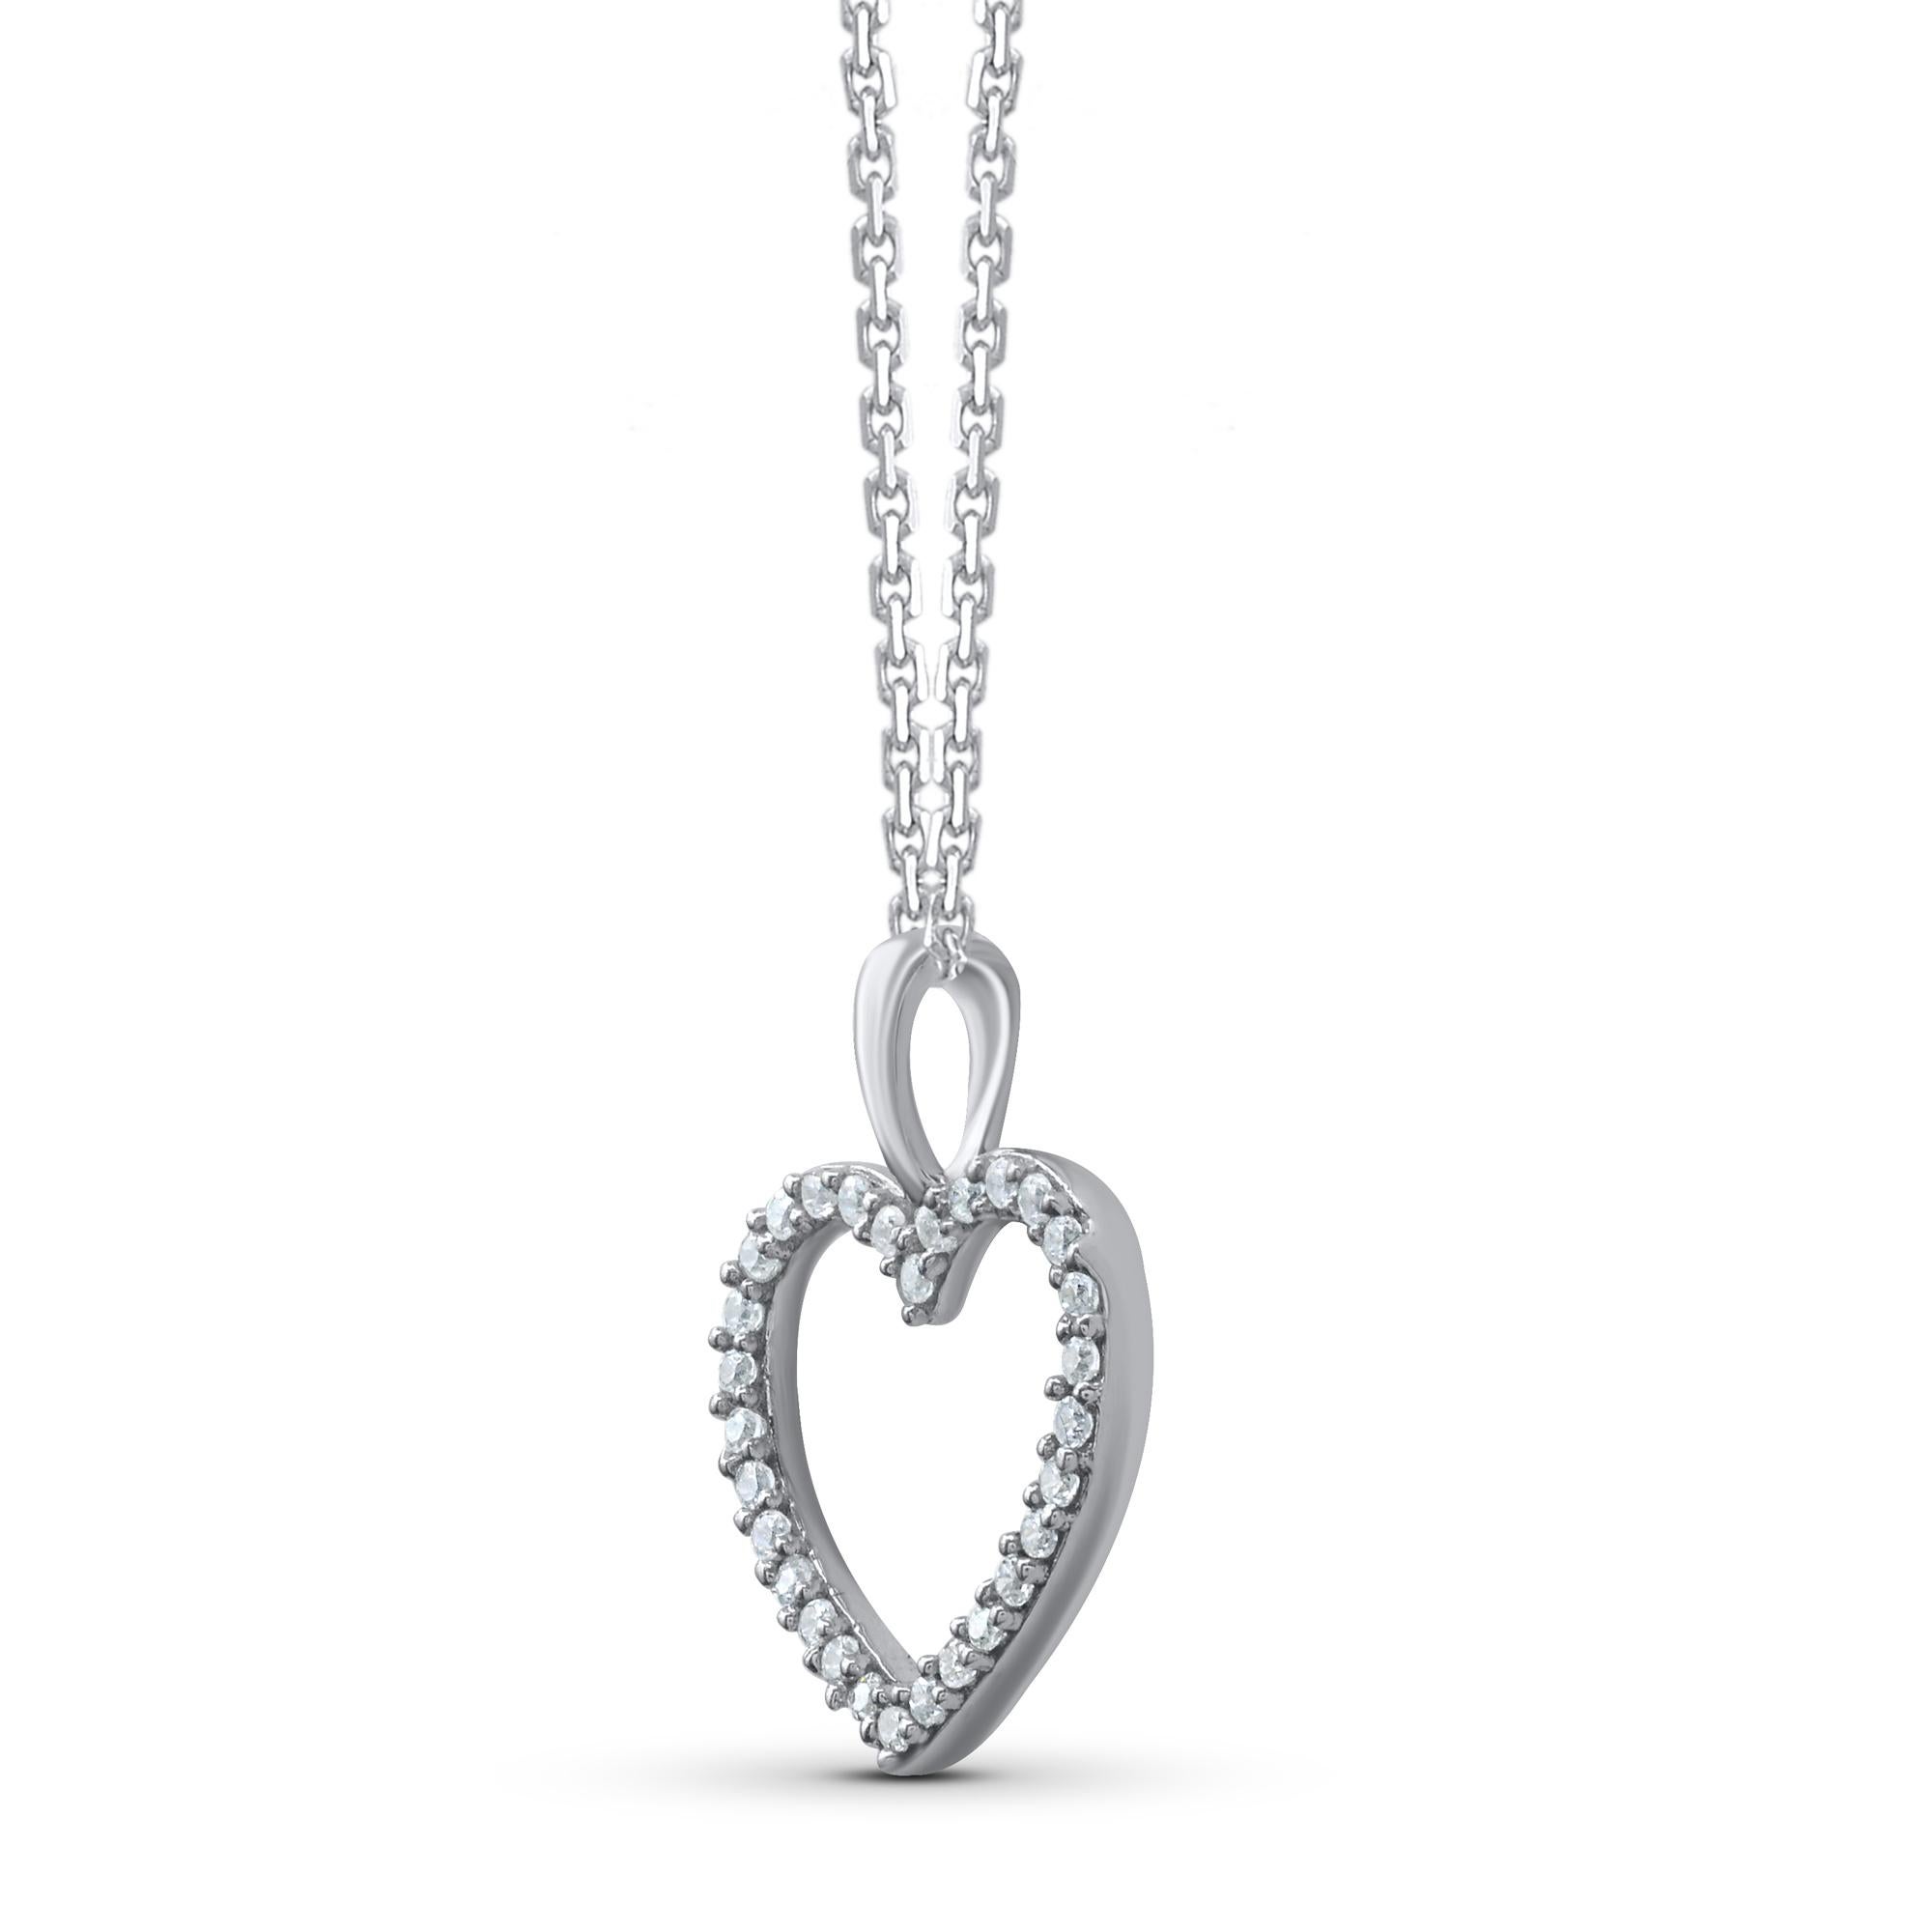 Bring charm to your look with this diamond heart pendant necklace. The pendant is crafted from 14 karat white gold and features 30 round single cut diamond set in pave setting and a high polish finish complete the brilliant sophistication of this